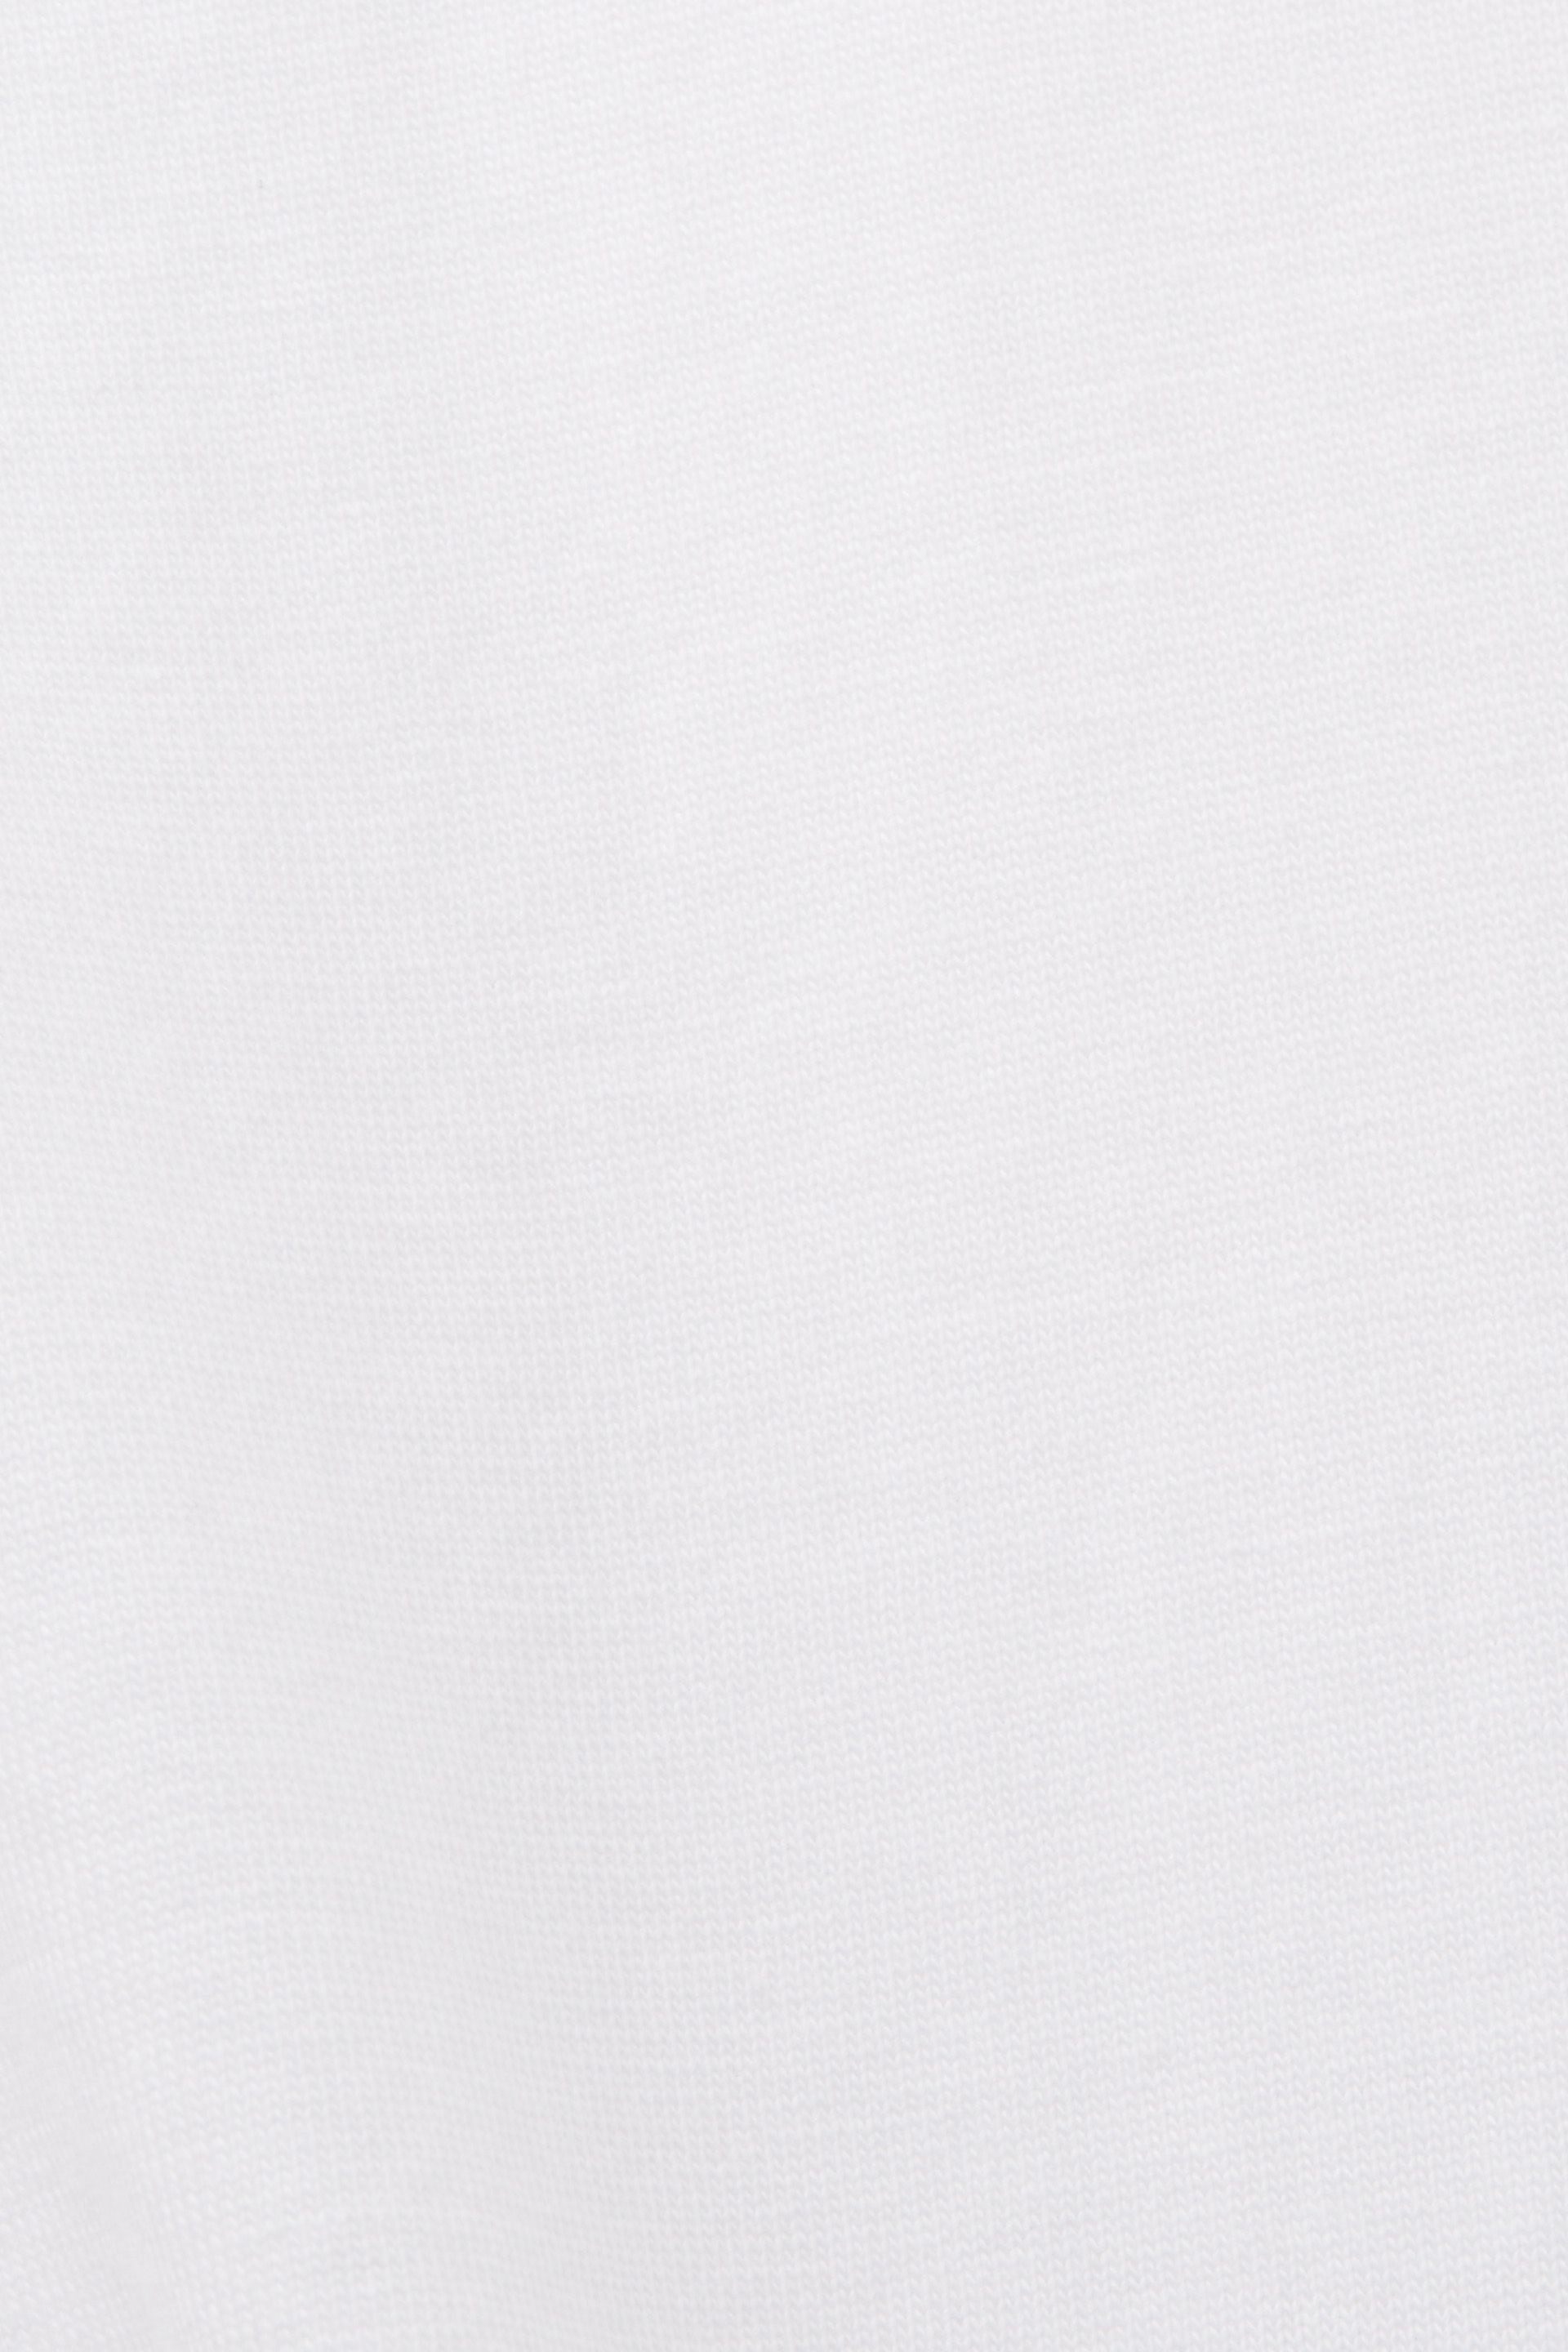 Esprit - T-shirt in cotone con stampa, Bianco, large image number 3